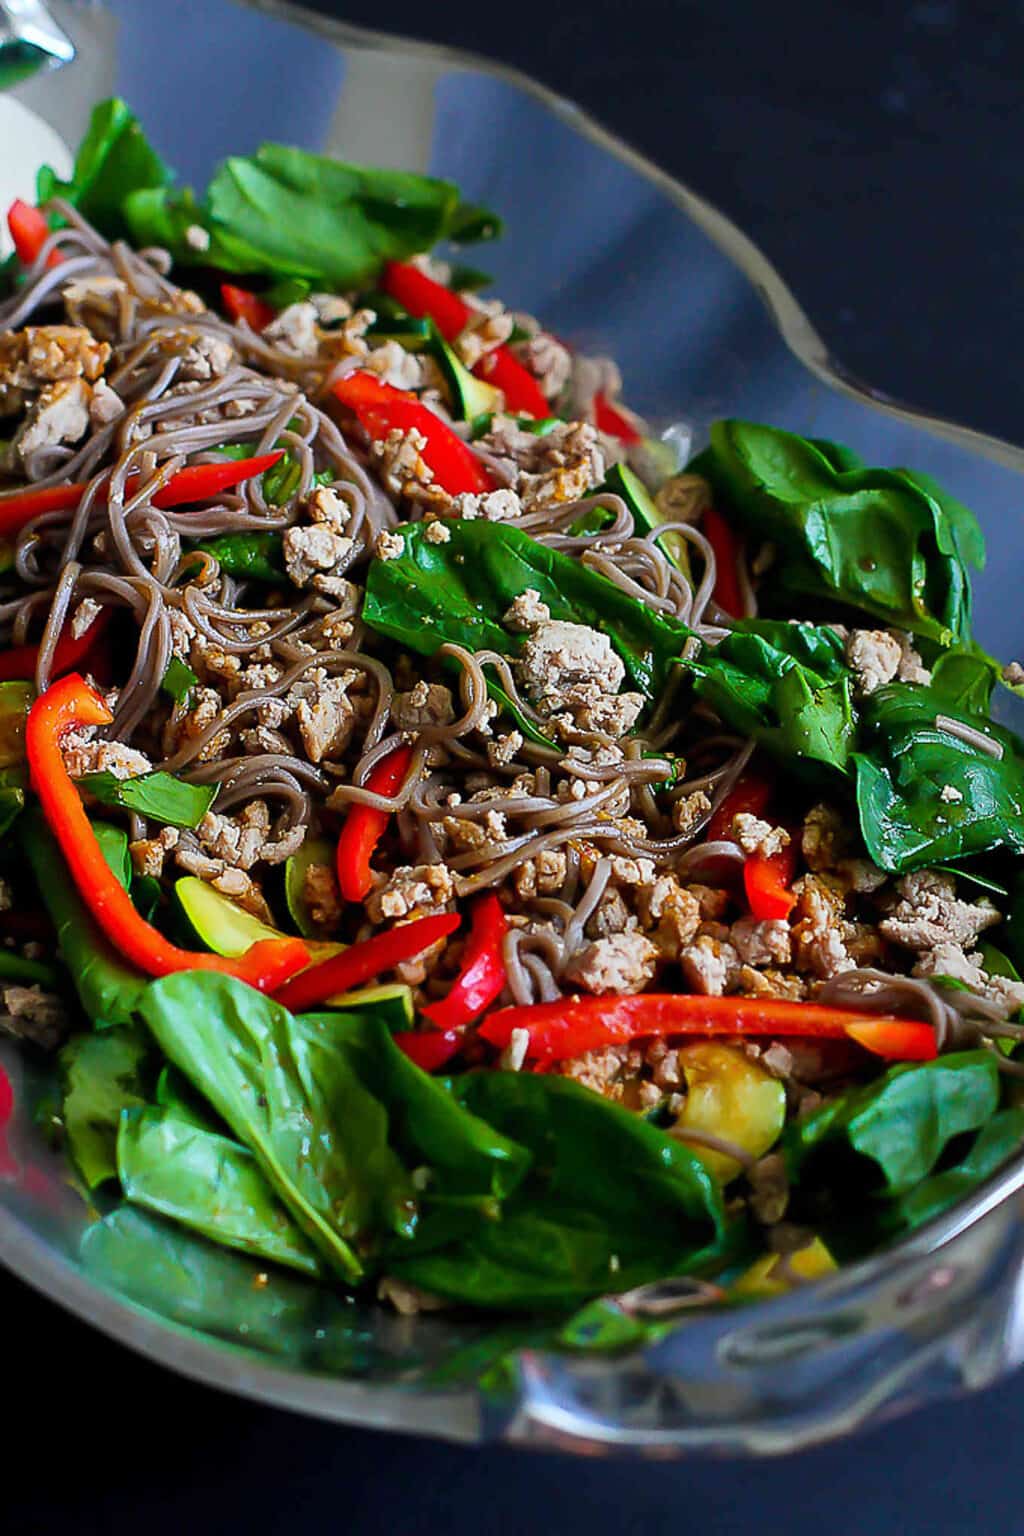 Healthy and delicious! This gluten free soba noodle salad is packed with lean protein and vegetables. 286 calories and 5 Weight Watchers SP | Cold | Asian | Dressing | Easy | Turkey | Recipe | Simple | Meal Prep | Japanese #glutenfree #sobanoodles #wwrecipes #smartpoints #healthydinnerrecipes